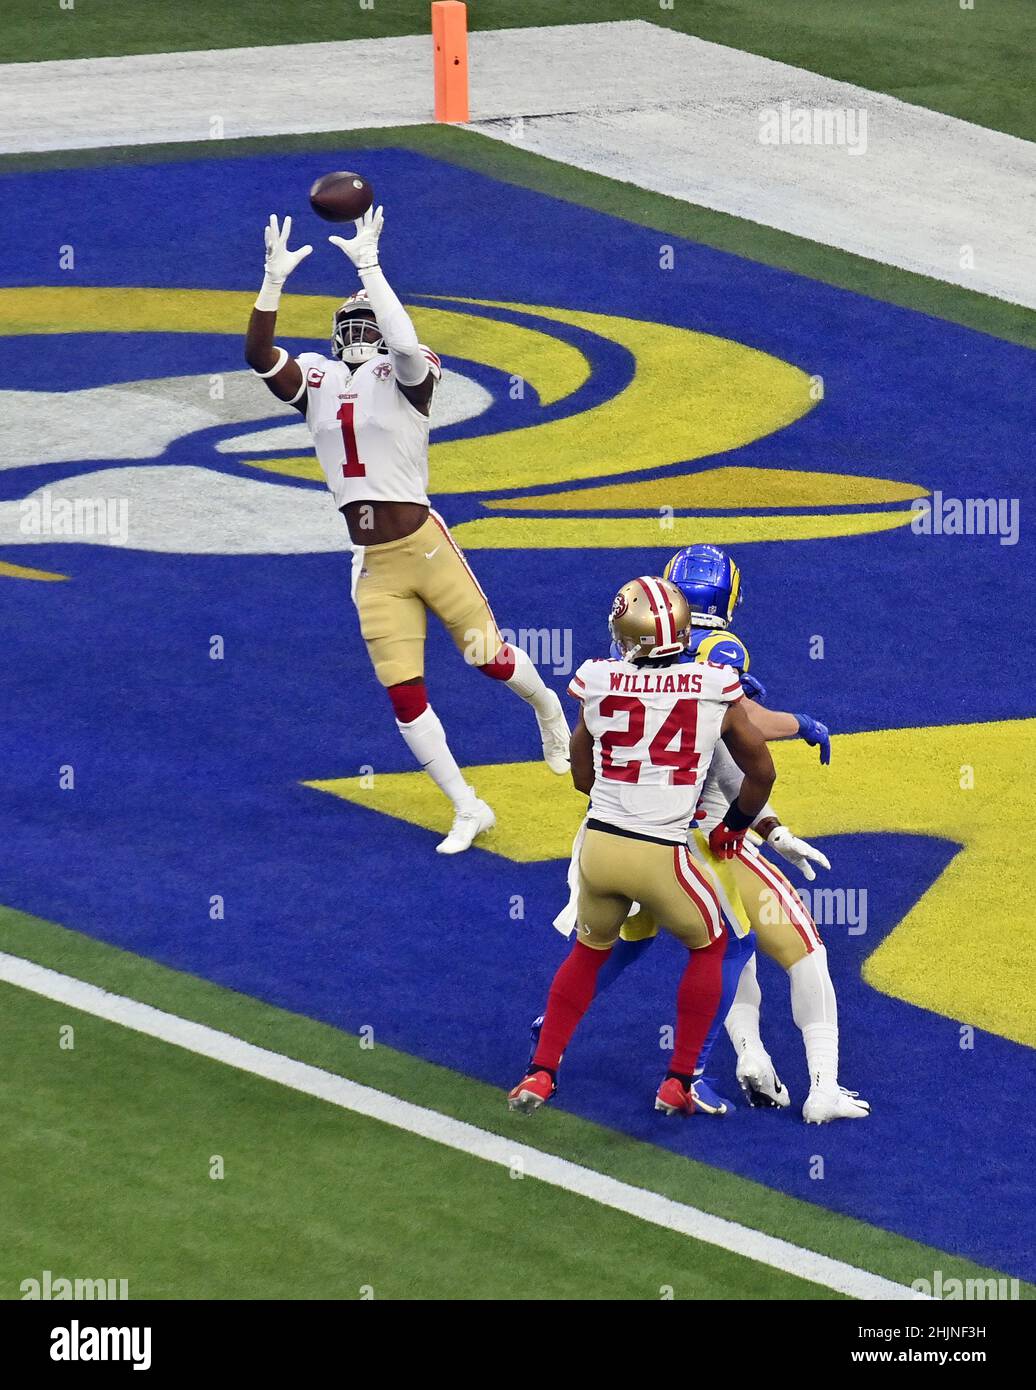 Inglewood, United States. 31st Jan, 2022. San Francisco 49ers' Jimmie Ward (1) intercepts the pass by Los Angeles Rams' quarterback Matthew Stafford during the first quarter of the NFC Championship game at SoFi Stadium in Inglewood, California on Sunday, January 30, 2022. Photo by Jim Ruymen/UPI Credit: UPI/Alamy Live News Stock Photo